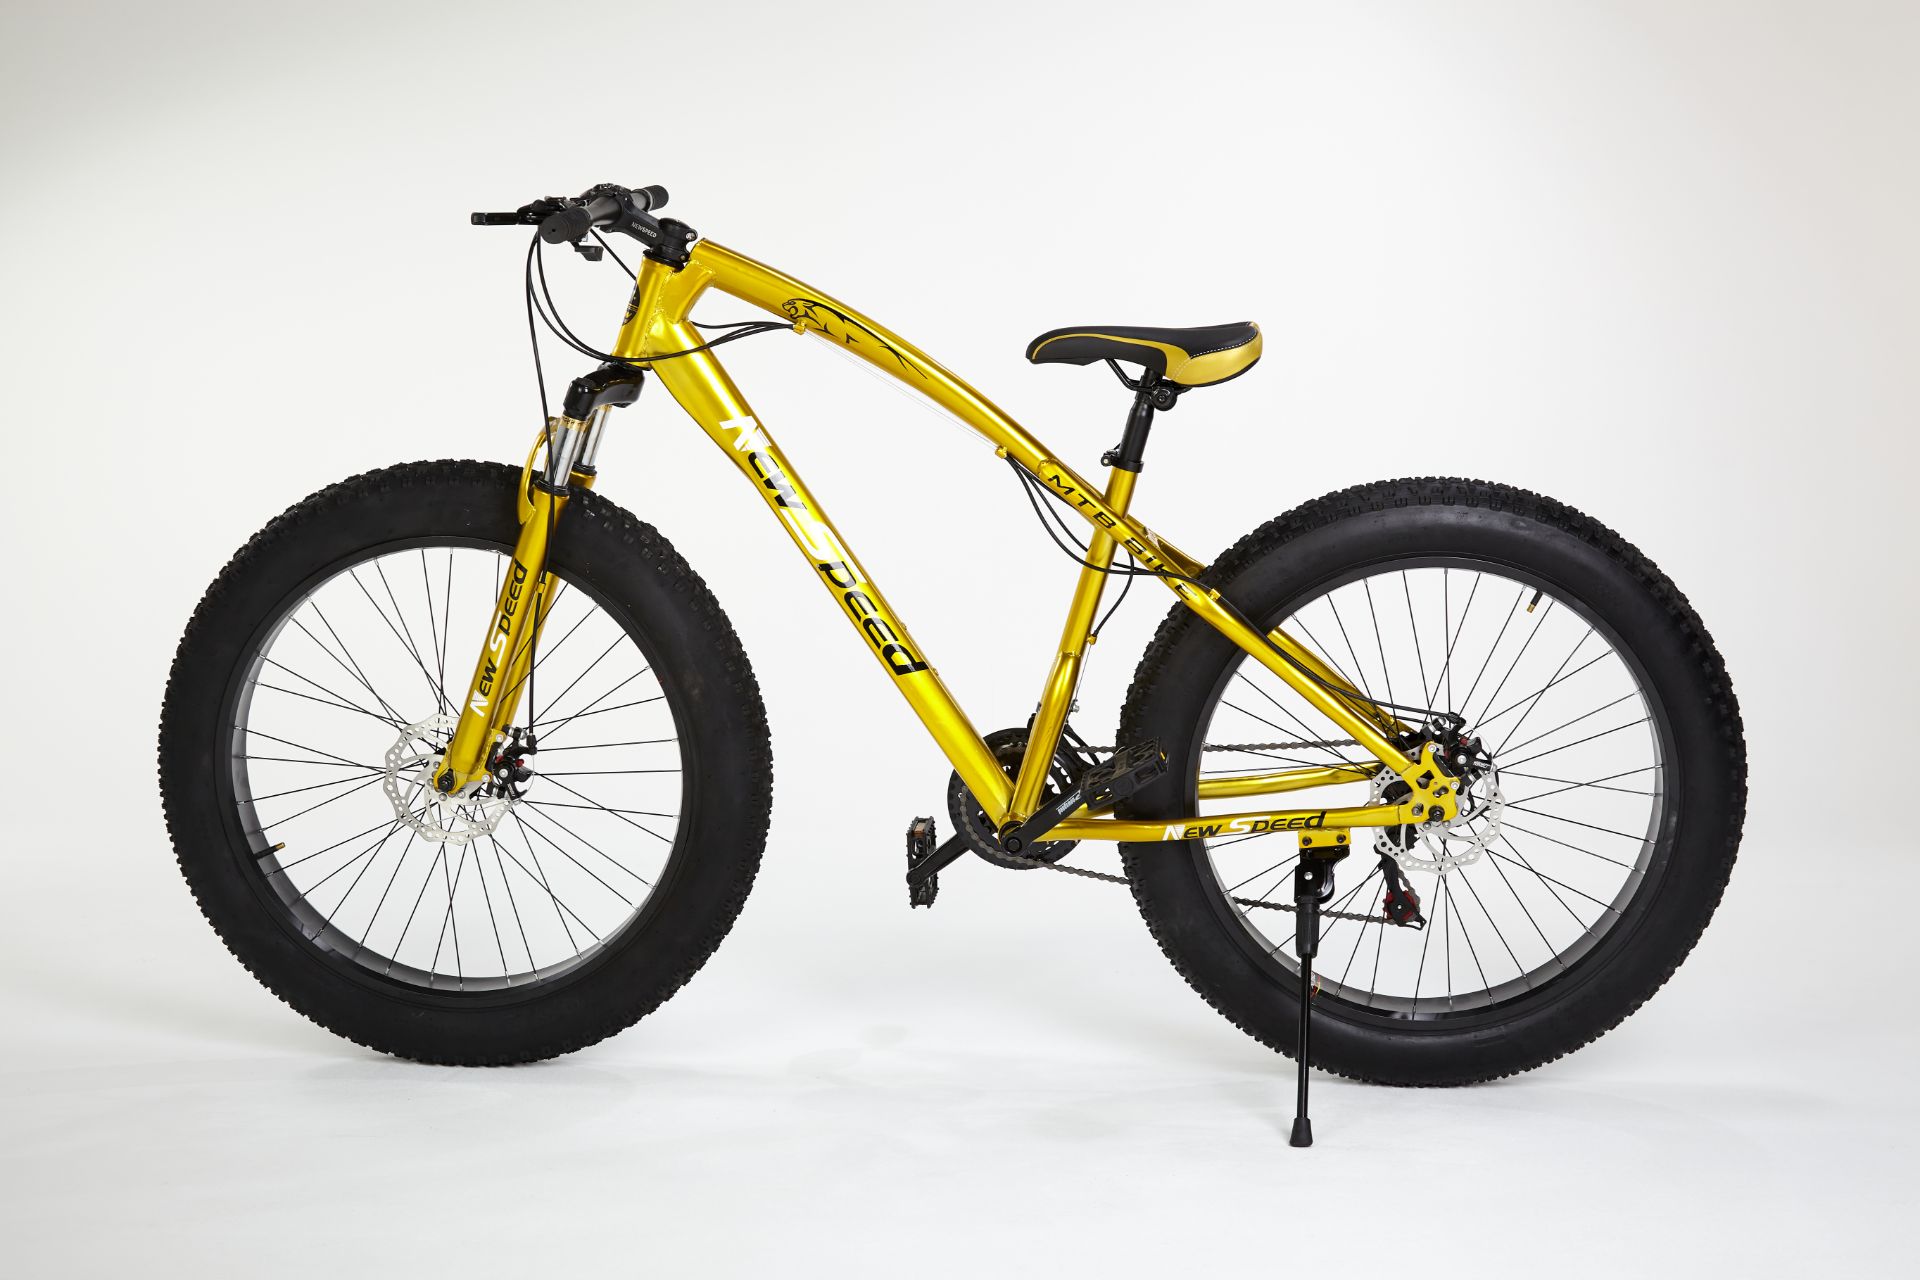 21 GEARS MOUNTAIN BIKE BICYCLE MEN/WOMEN FAT TIRE 26" MTB WITH FRONT SUSPENSION - GOLD - Image 5 of 14